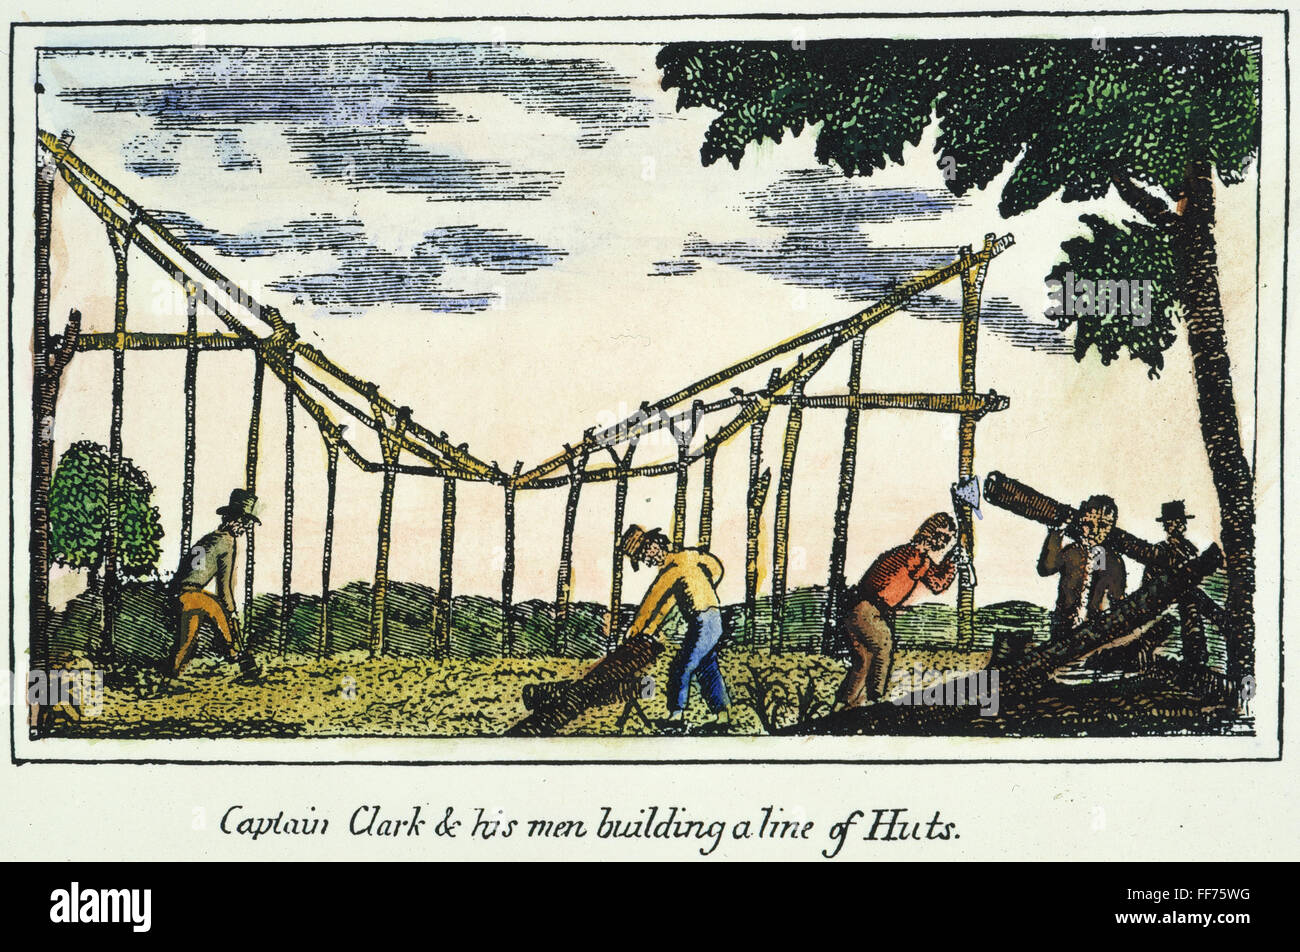 LEWIS & CLARK: HUTS, 1800s. /nMembers of the Lewis & Clak expedition building a line of huts: colored engraving, 1811, from a contemporary account of the expedition. Stock Photo